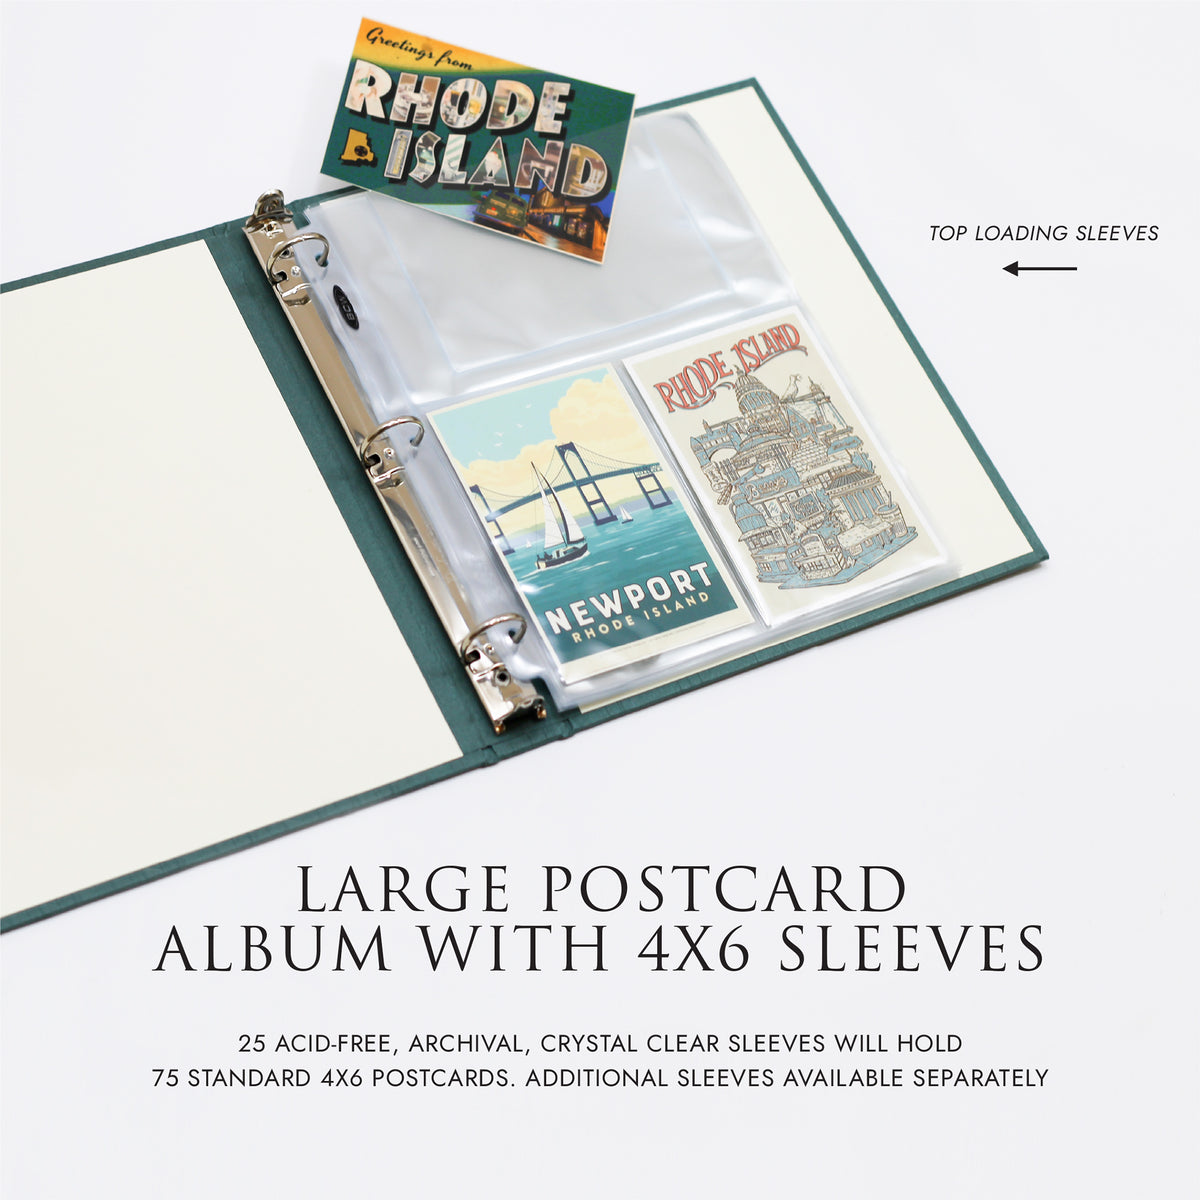 Large Postcard Album with Dove Gray Cotton Cover | Select Sleeves for 4x6 or 5x7 Postcards